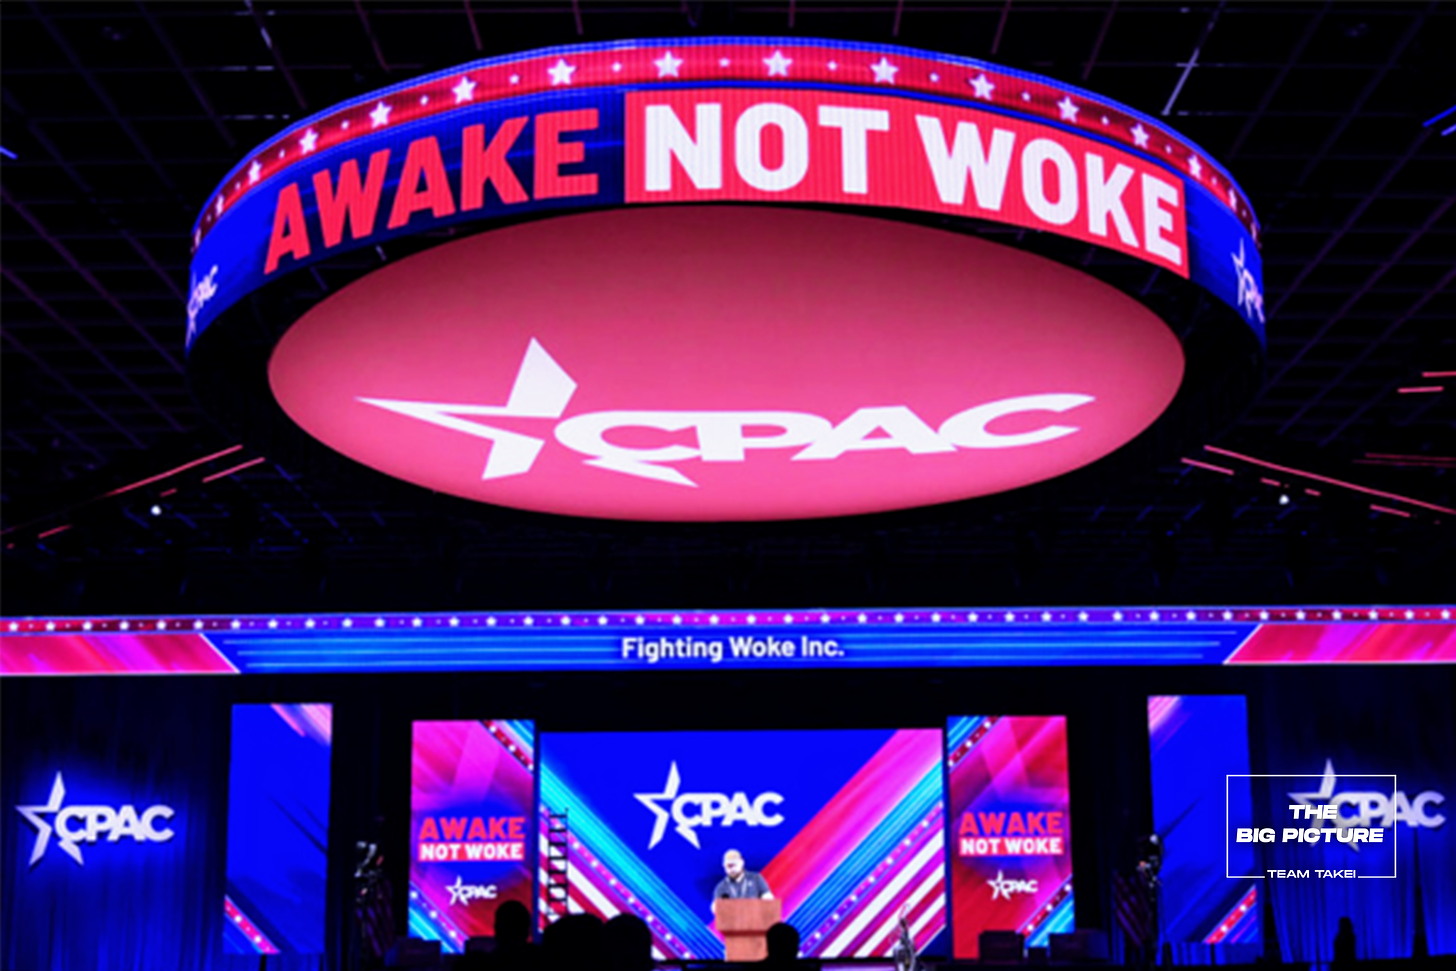 2022 meeting of the Conservative Political Action Conference (CPAC)